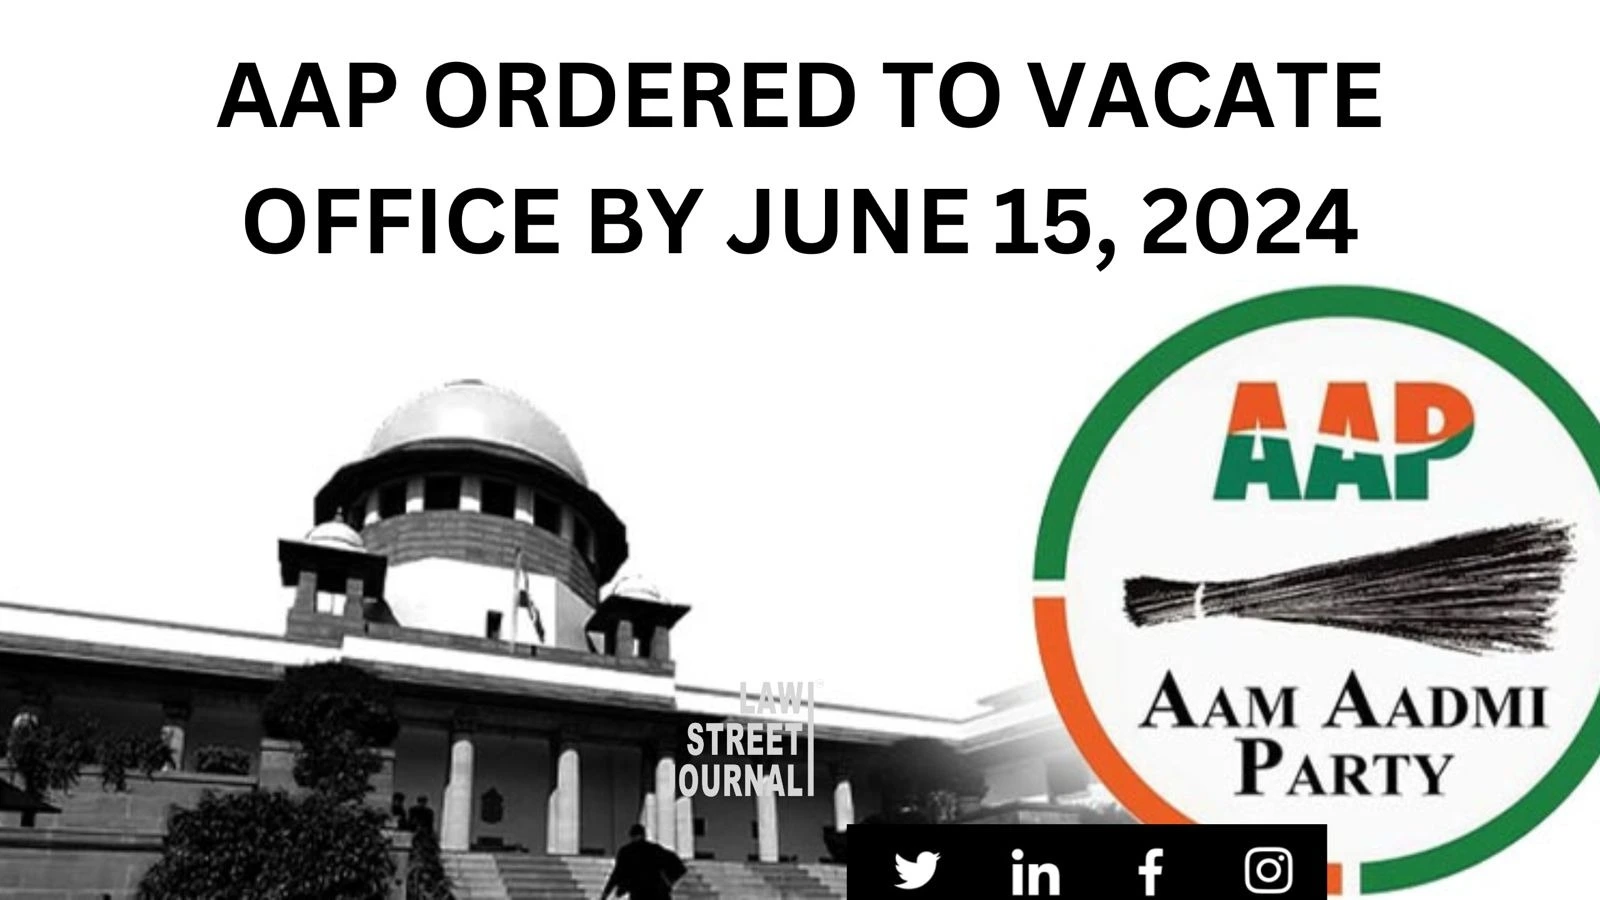 ‘You got no lawful right to be in occupation’, SC tells AAP to vacate its office by June 15, 2024